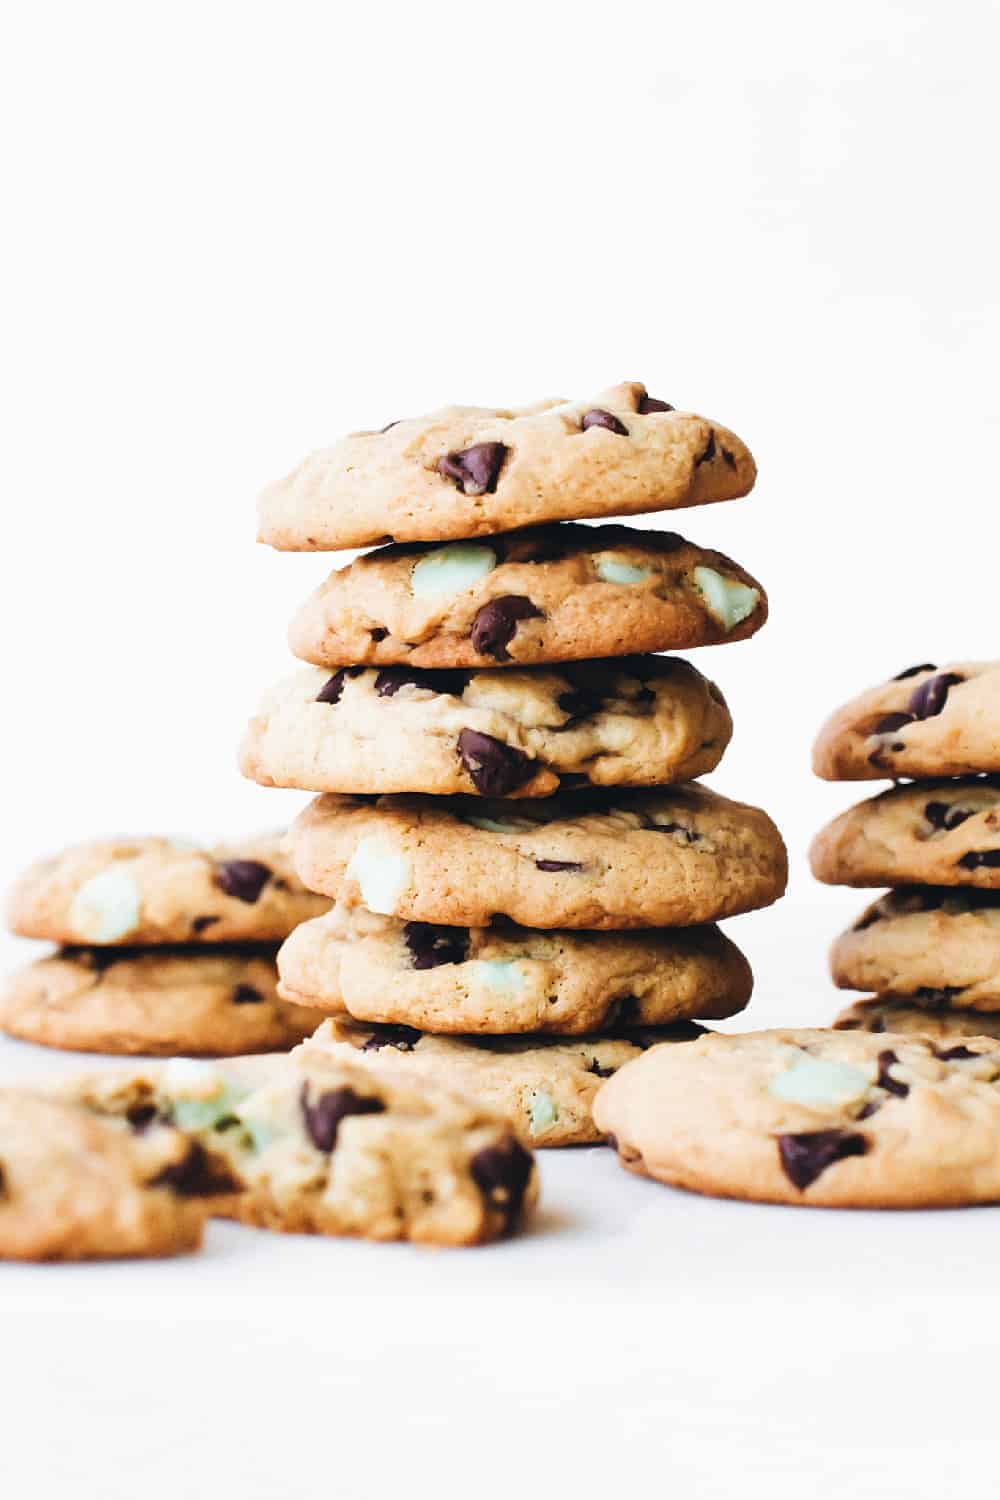 Chewy Mint Chocolate Chip Cookies are the perfect chewy chocolate chip cookie. They're studded with chocolate chips and mint chips for the best mint and chocolate flavor.